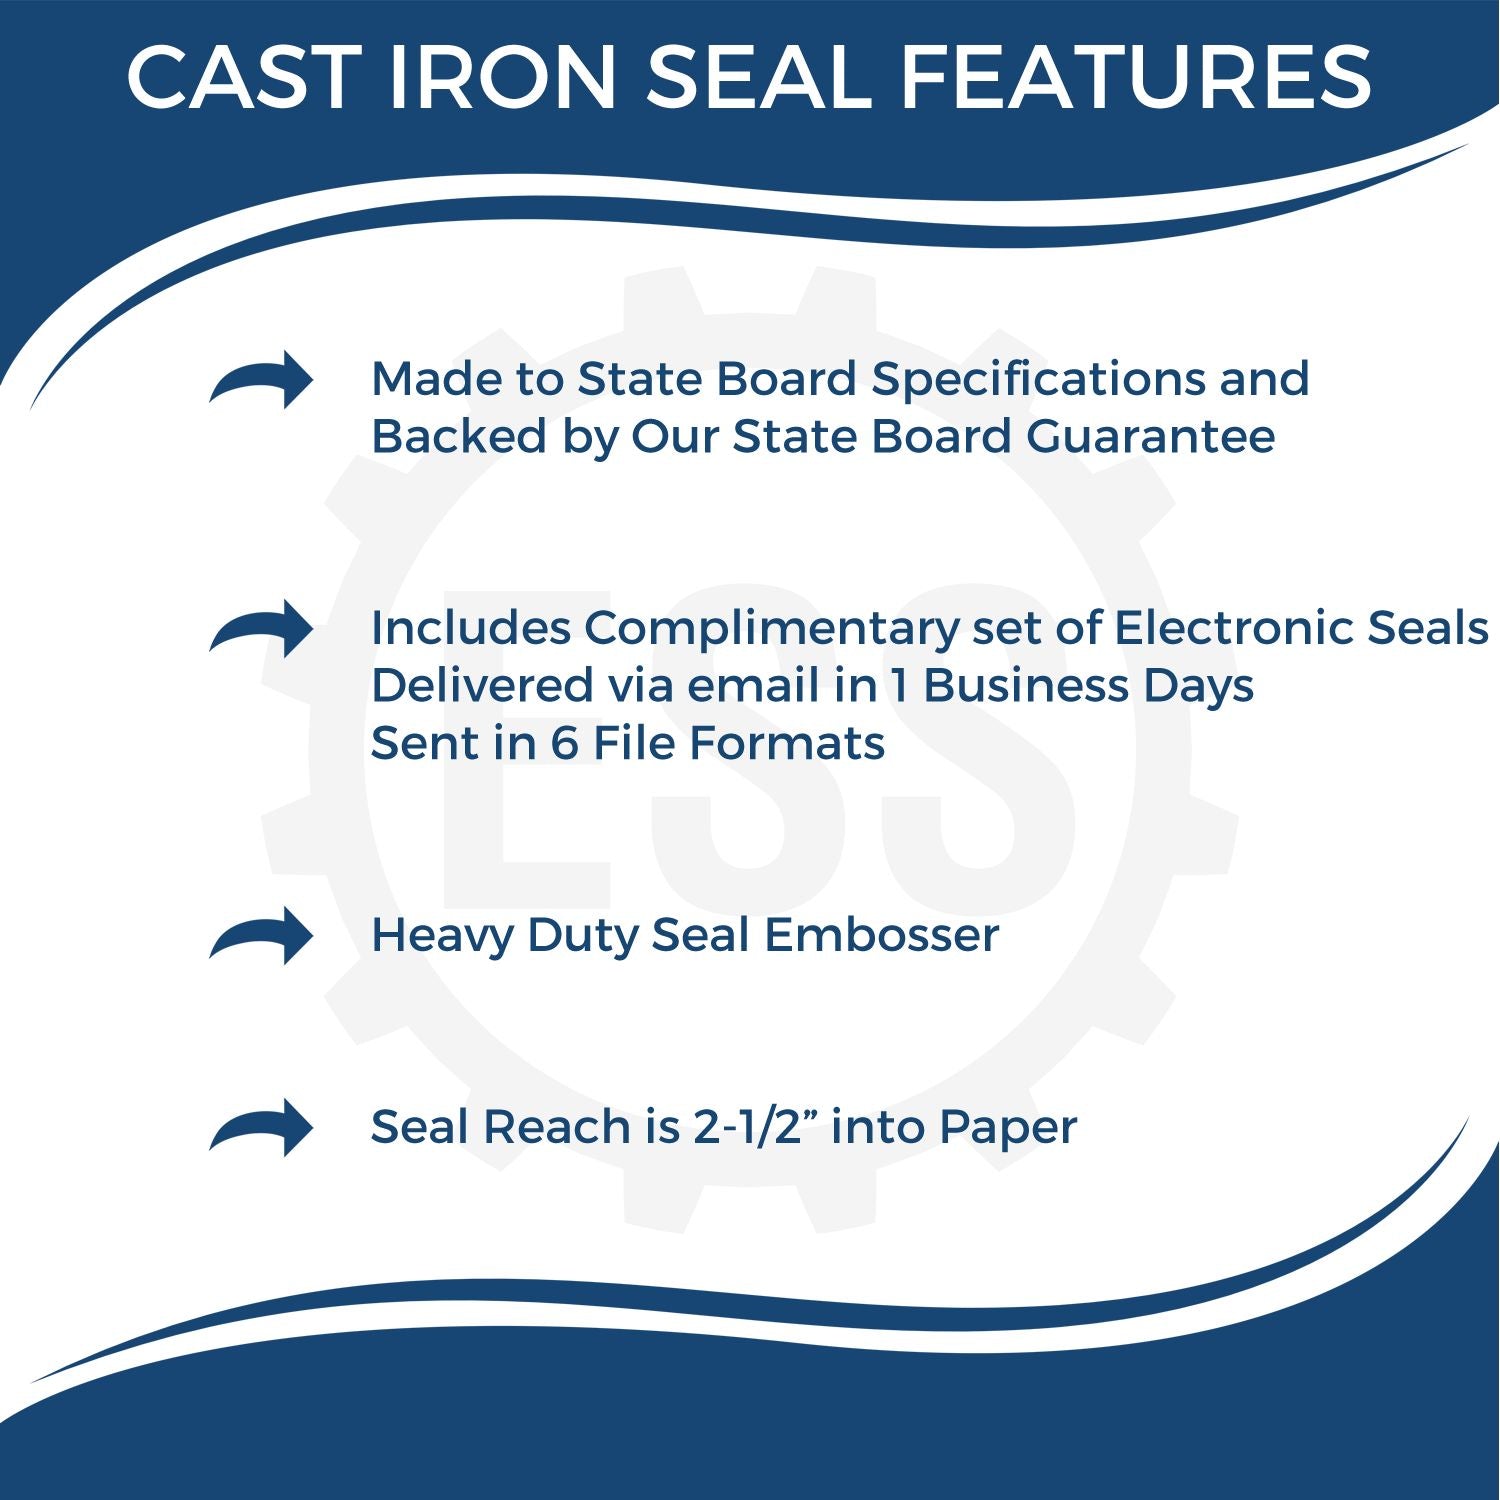 The main image for the Heavy Duty Cast Iron Maine Land Surveyor Seal Embosser depicting a sample of the imprint and electronic files